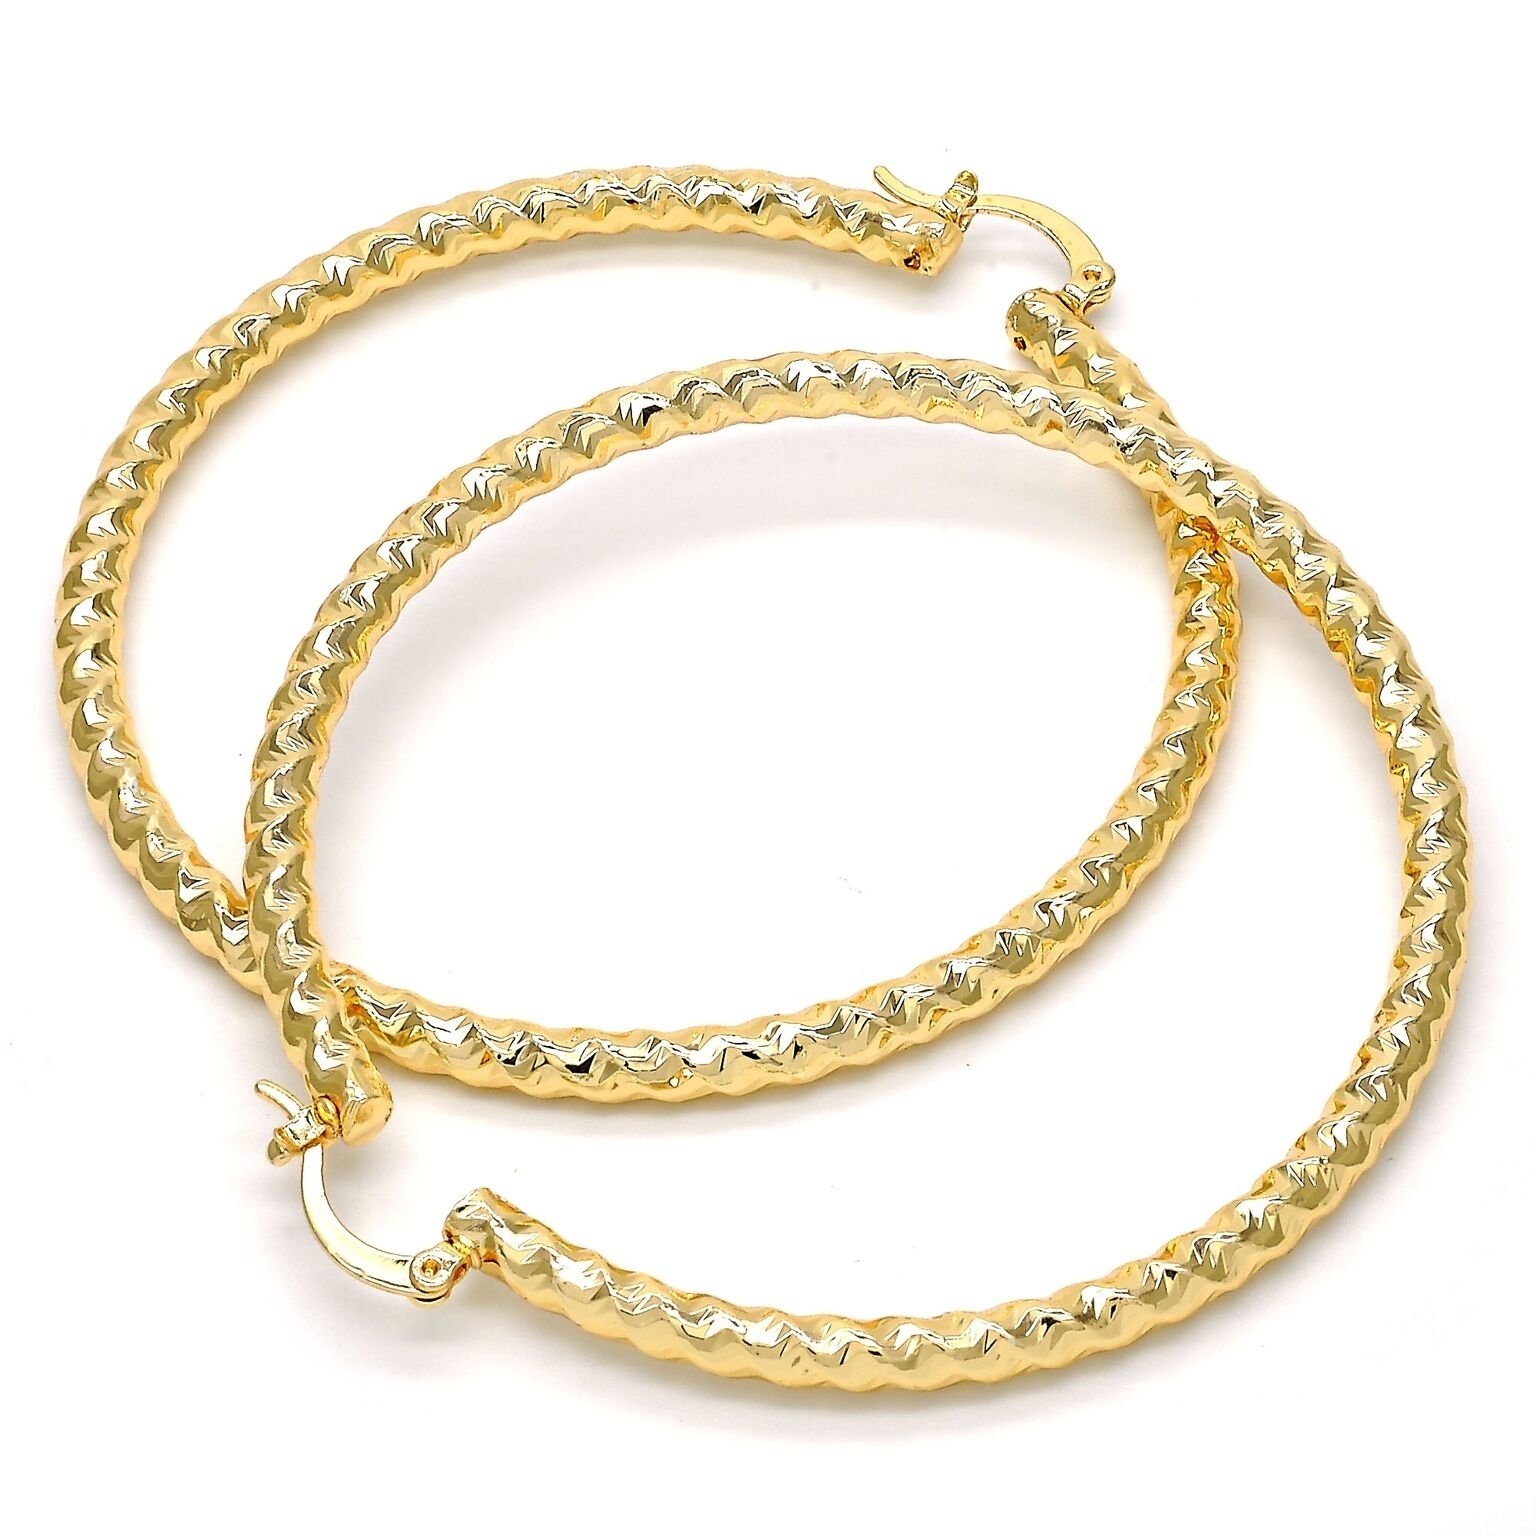 Gold Filled High Polish Finsh Extra Large Hoop, Twist And Hollow Design, Golden Tone 70MM